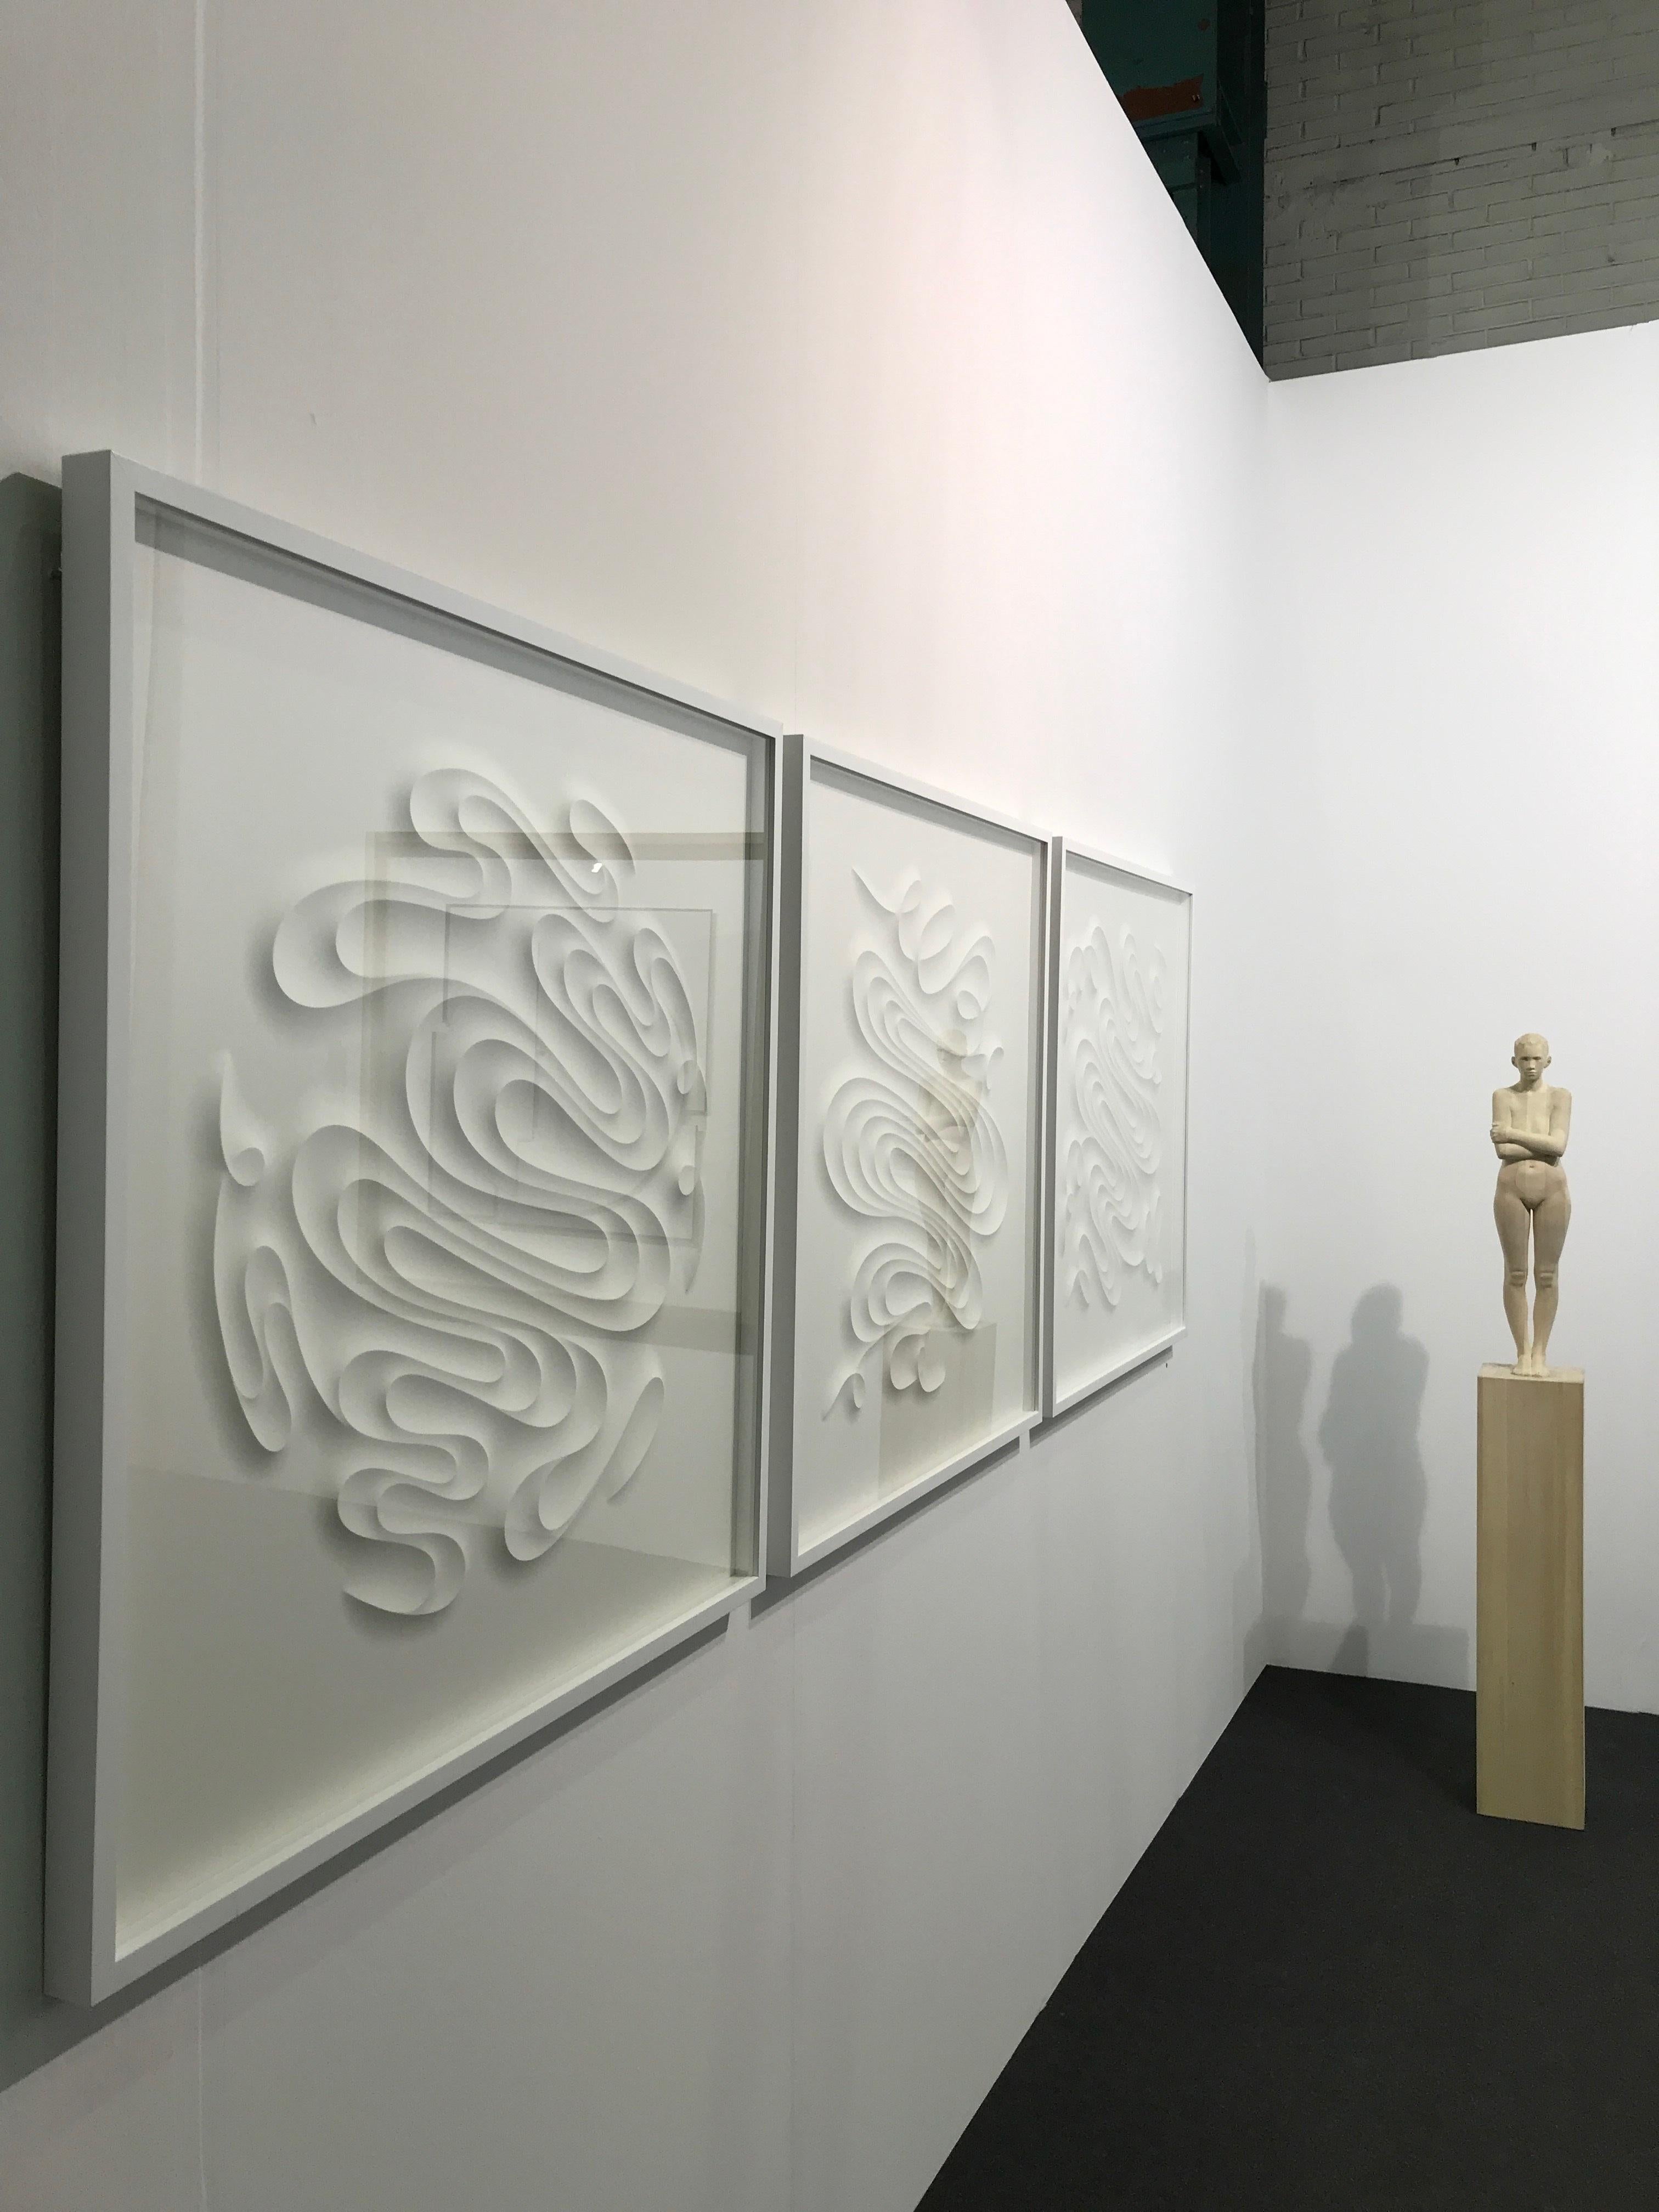 FESCOMX - curvature sculpture embossing on arches paper - white minimalist  - Sculpture by Jacinto Moros